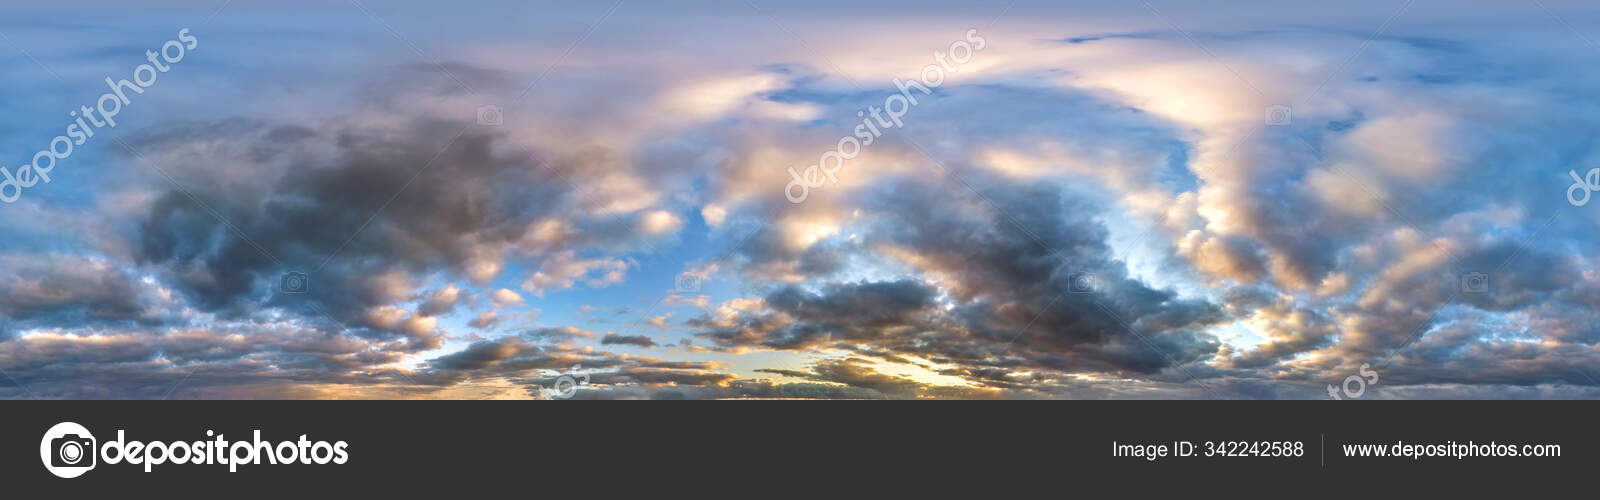 Seamless cloudy blue sky hdri panorama 360 degrees angle view with zenith  and beautiful clouds for use in 3d graphics or game development as sky dome  or edit drone shot Stock Photo